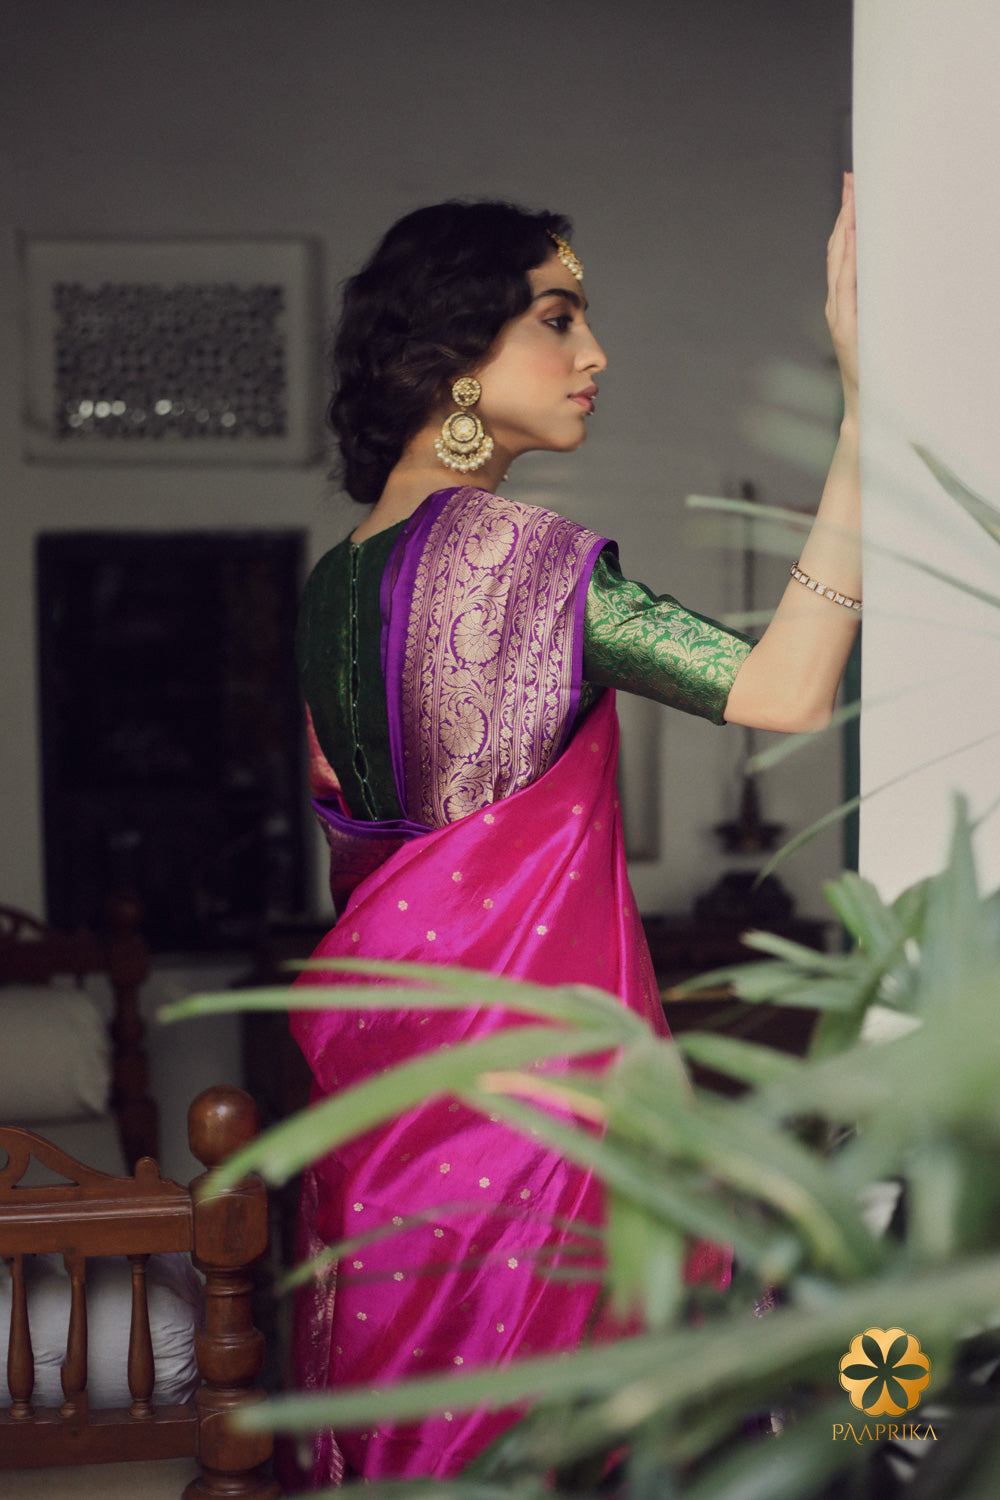 A stylish woman confidently wearing the Regal Purple Handwoven Spun Silk Saree with Intricate Gold Border. The saree's regal purple color and intricate gold border enhance her overall look, exuding an air of elegance and grandeur.